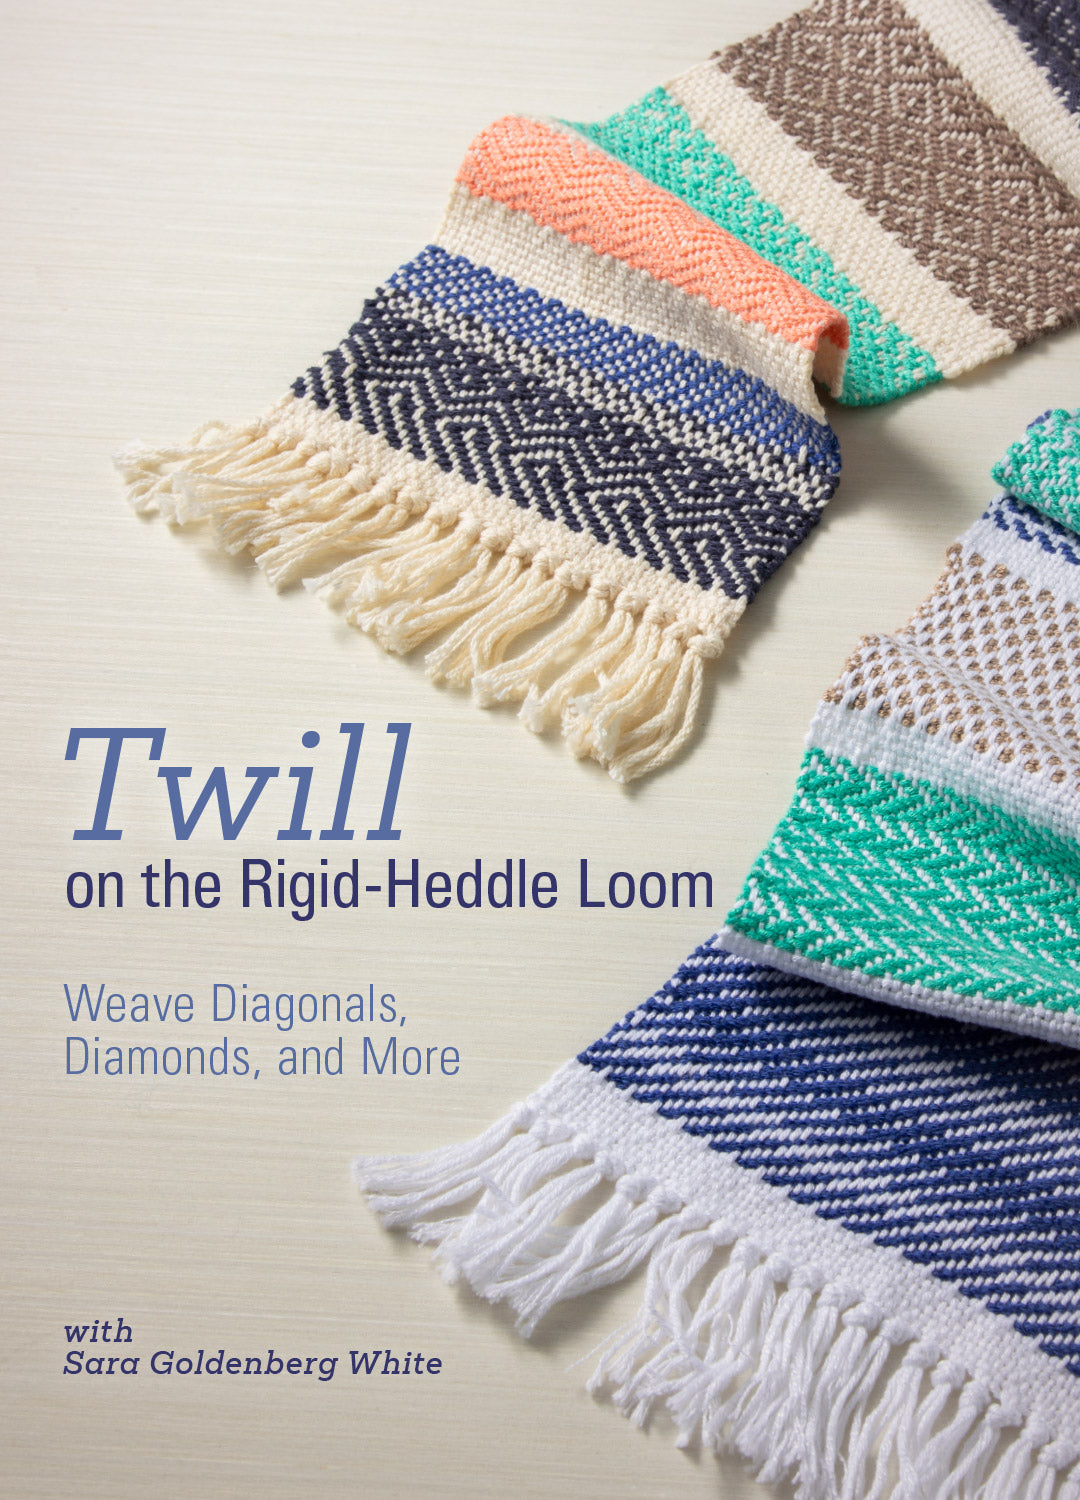 Twill on the Rigid-Heddle Loom Video Download